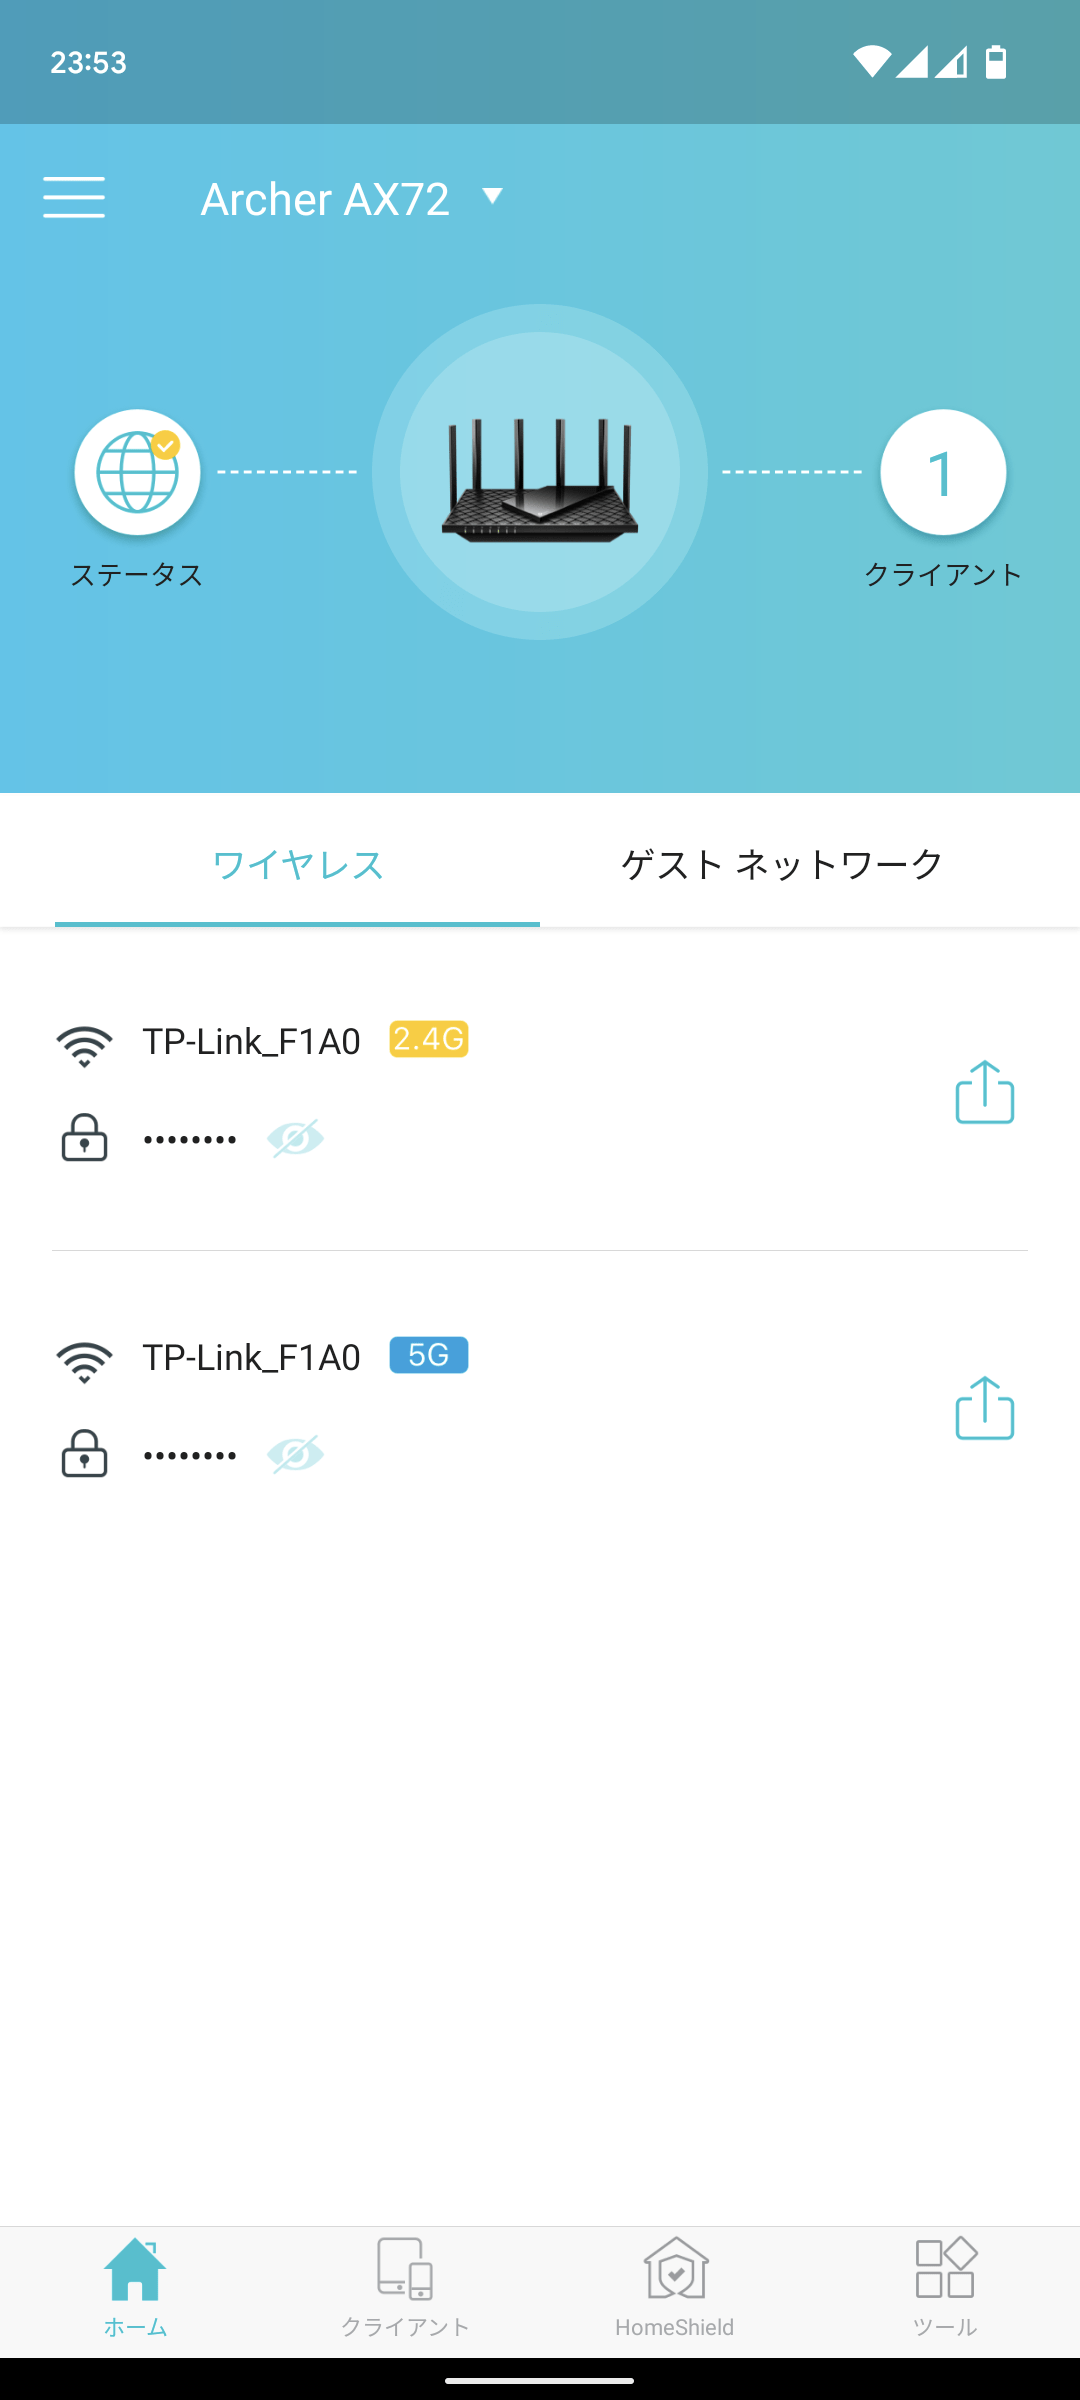 TP-Link Archer AX72 WiFi6対応ルーター レビュー TP-Linkアプリ ワイヤレス管理画面